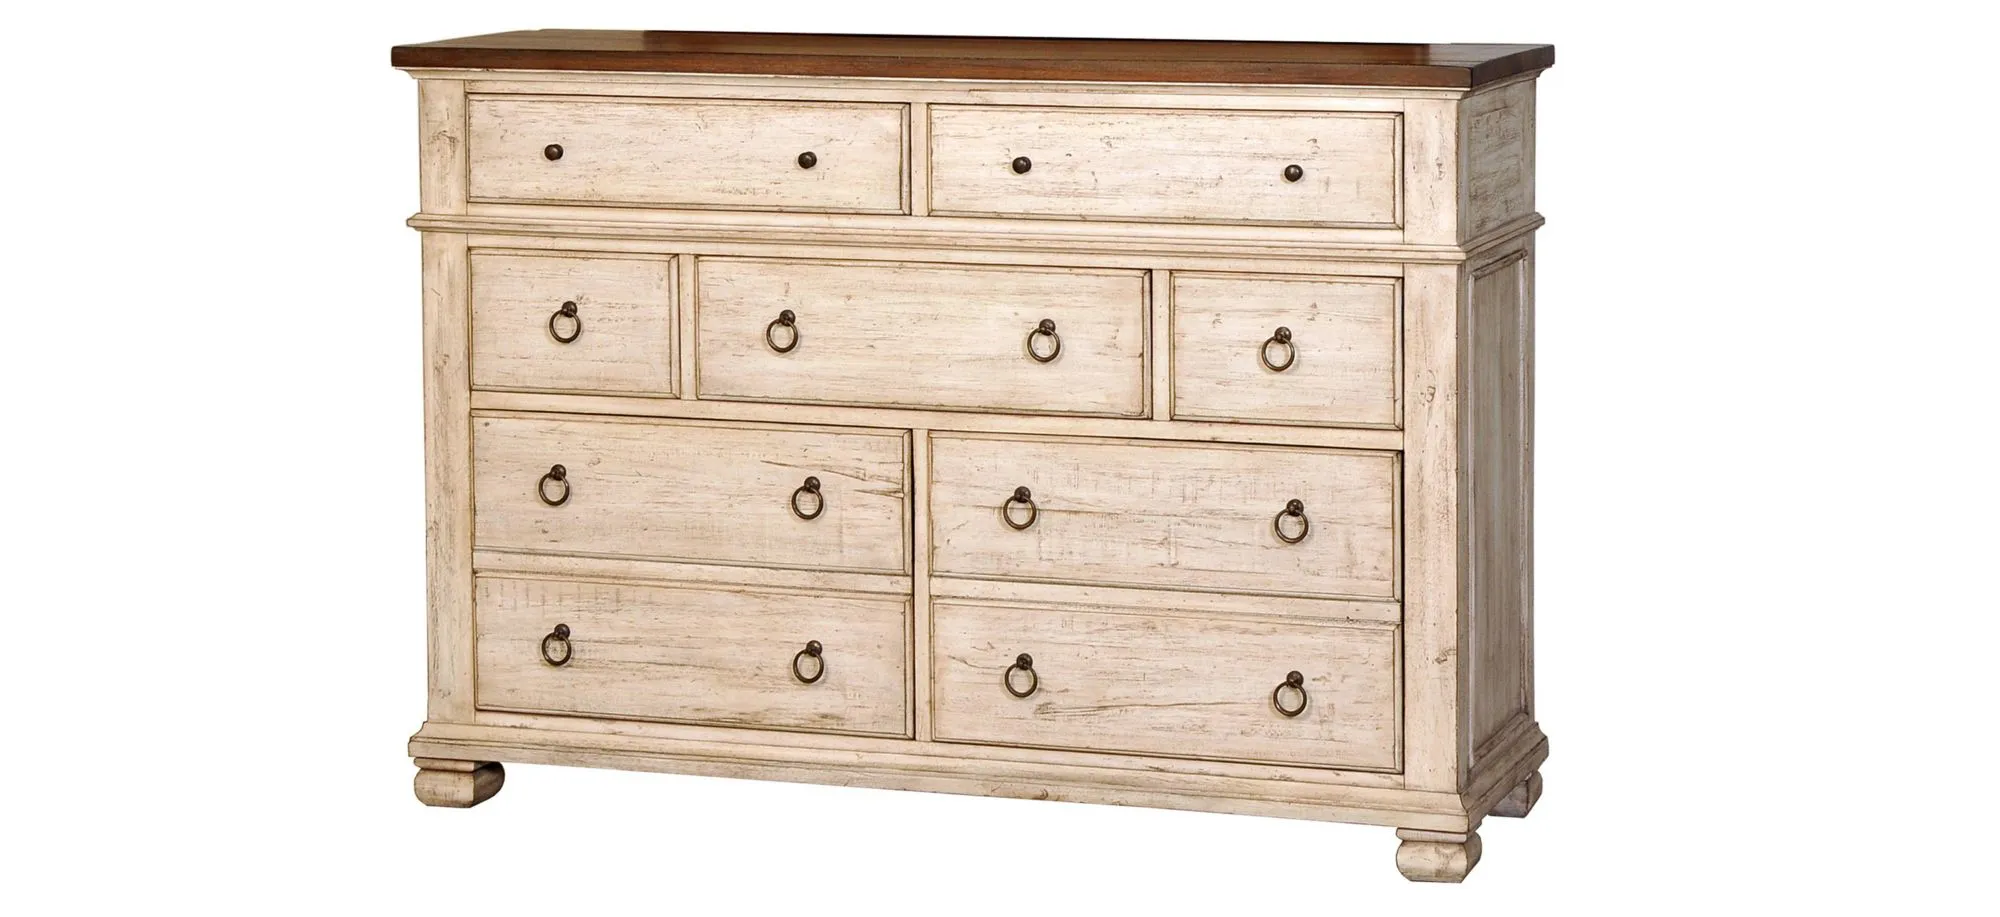 Belmont Dresser in Timbered Brown Farmhouse & Antique Linen by Napa Furniture Design